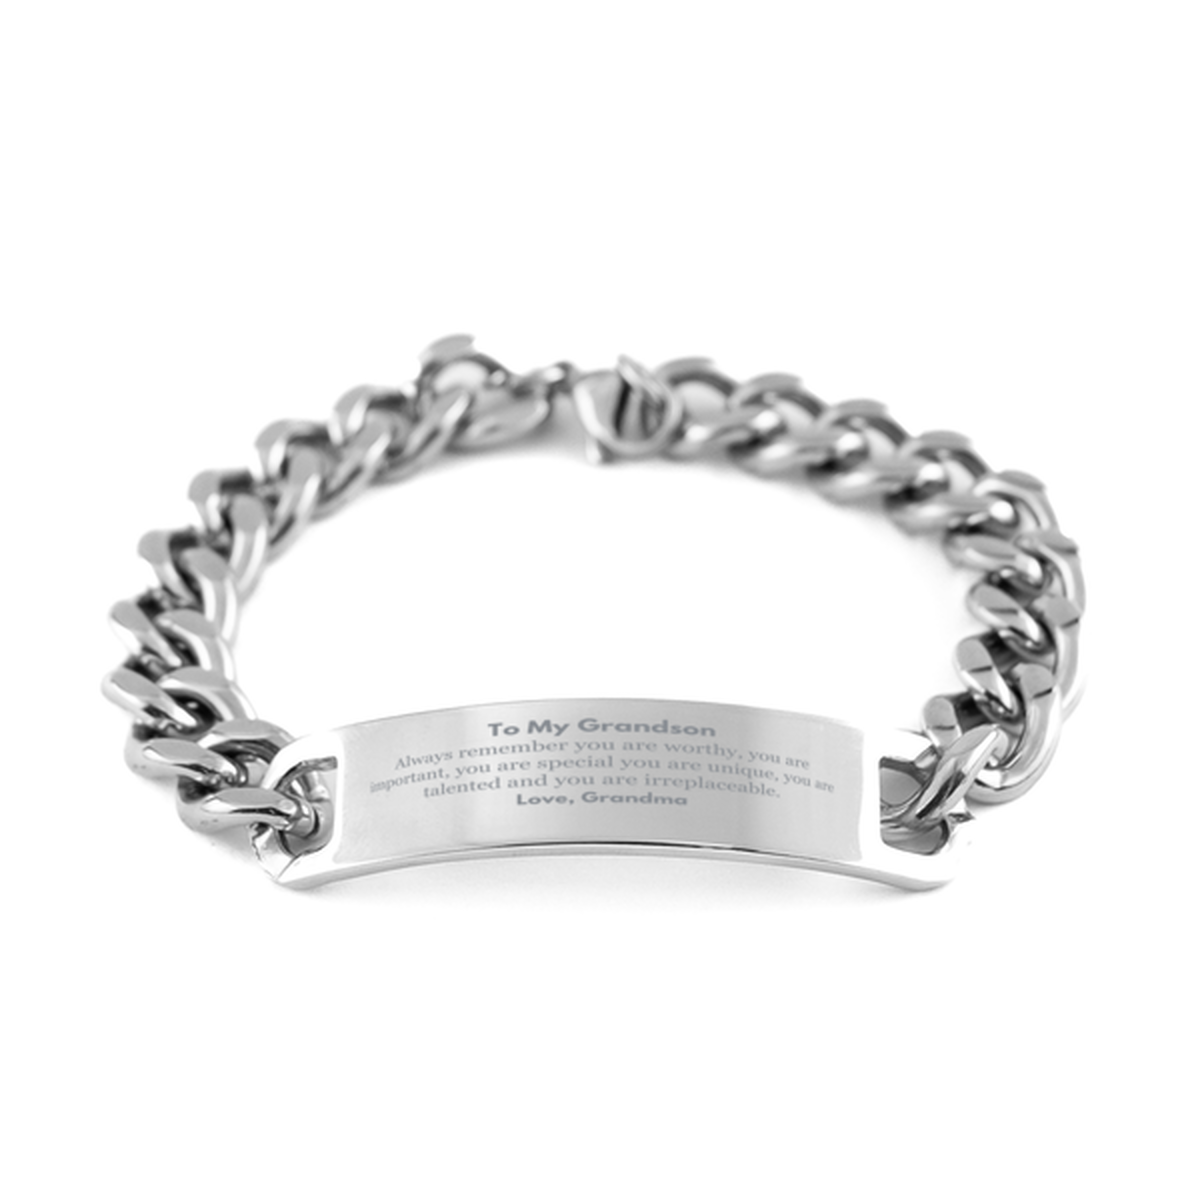 Grandson Birthday Gifts from Grandma, Inspirational Cuban Chain Stainless Steel Bracelet for Grandson Christmas Graduation Gifts for Grandson Always remember you are worthy, you are important. Love, Grandma